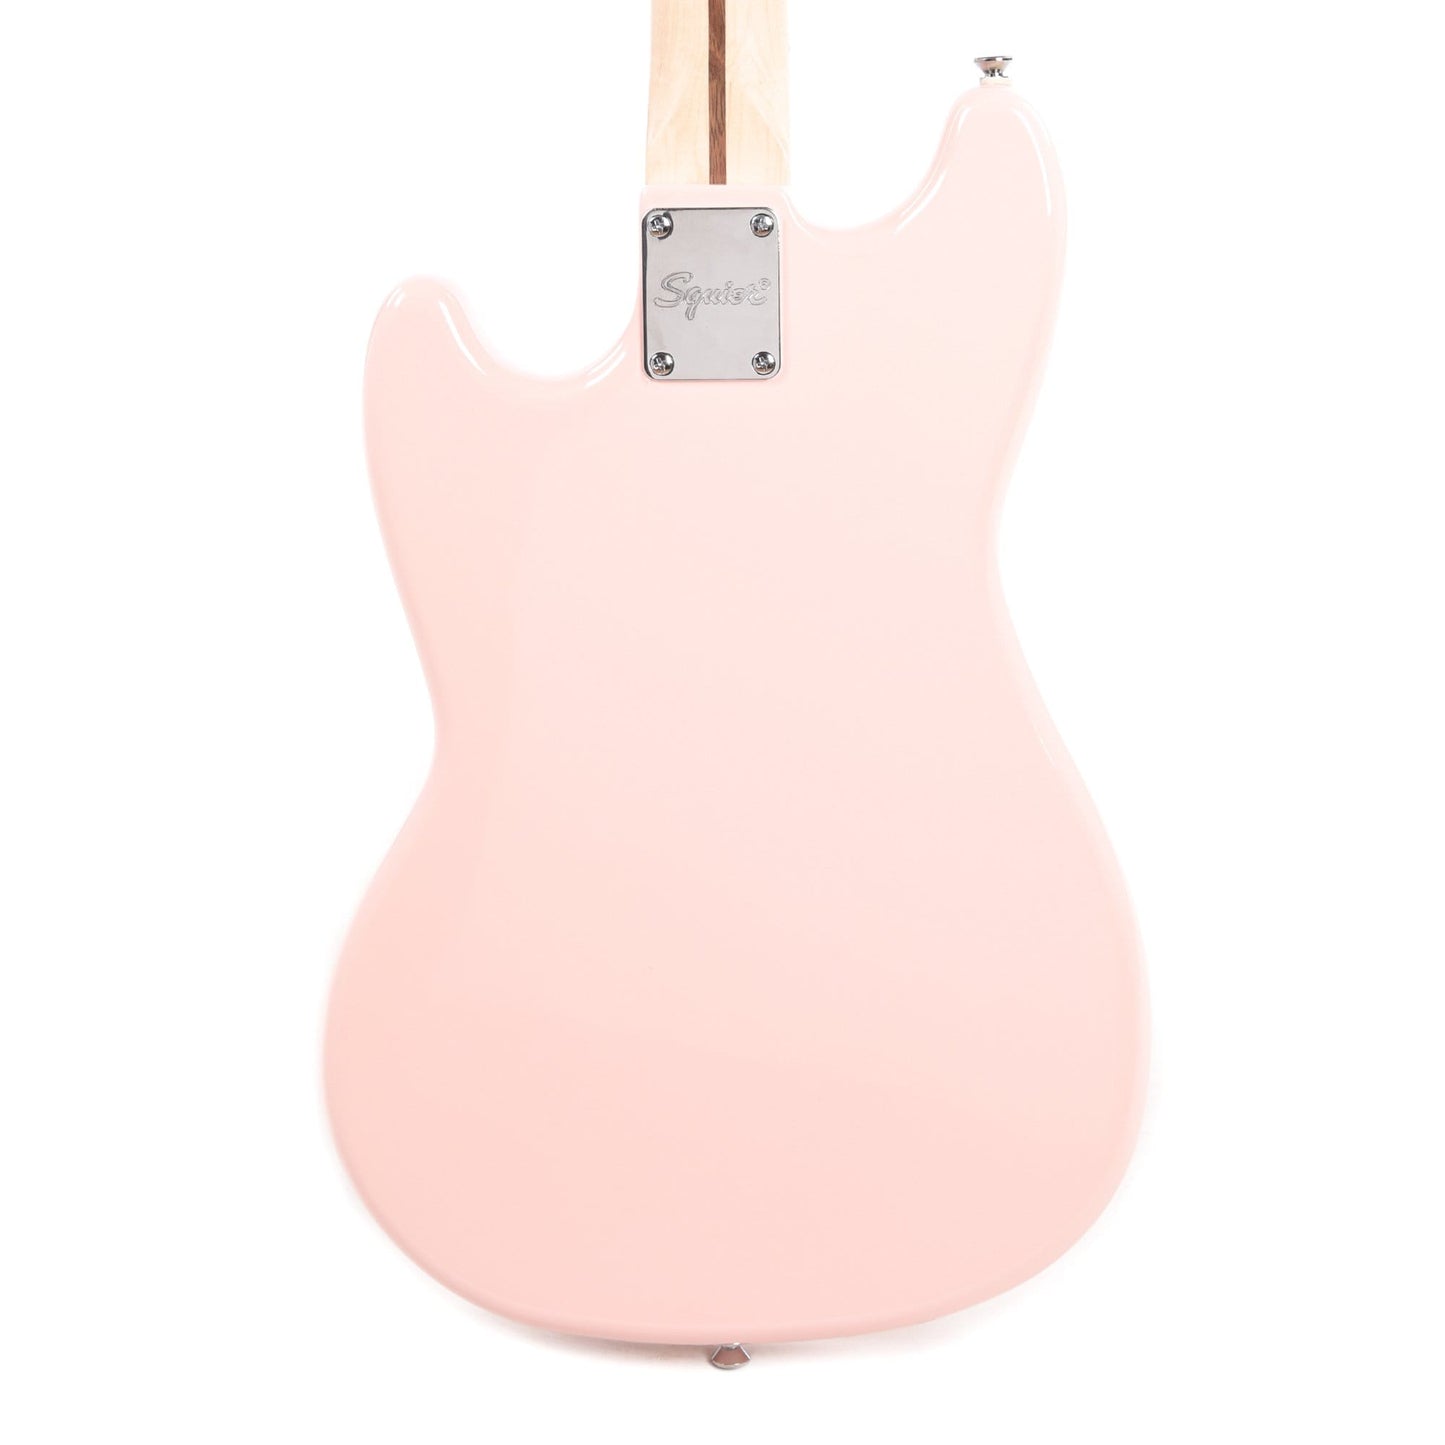 Squier Affinity Bronco Bass Shell Pink Bass Guitars / 4-String